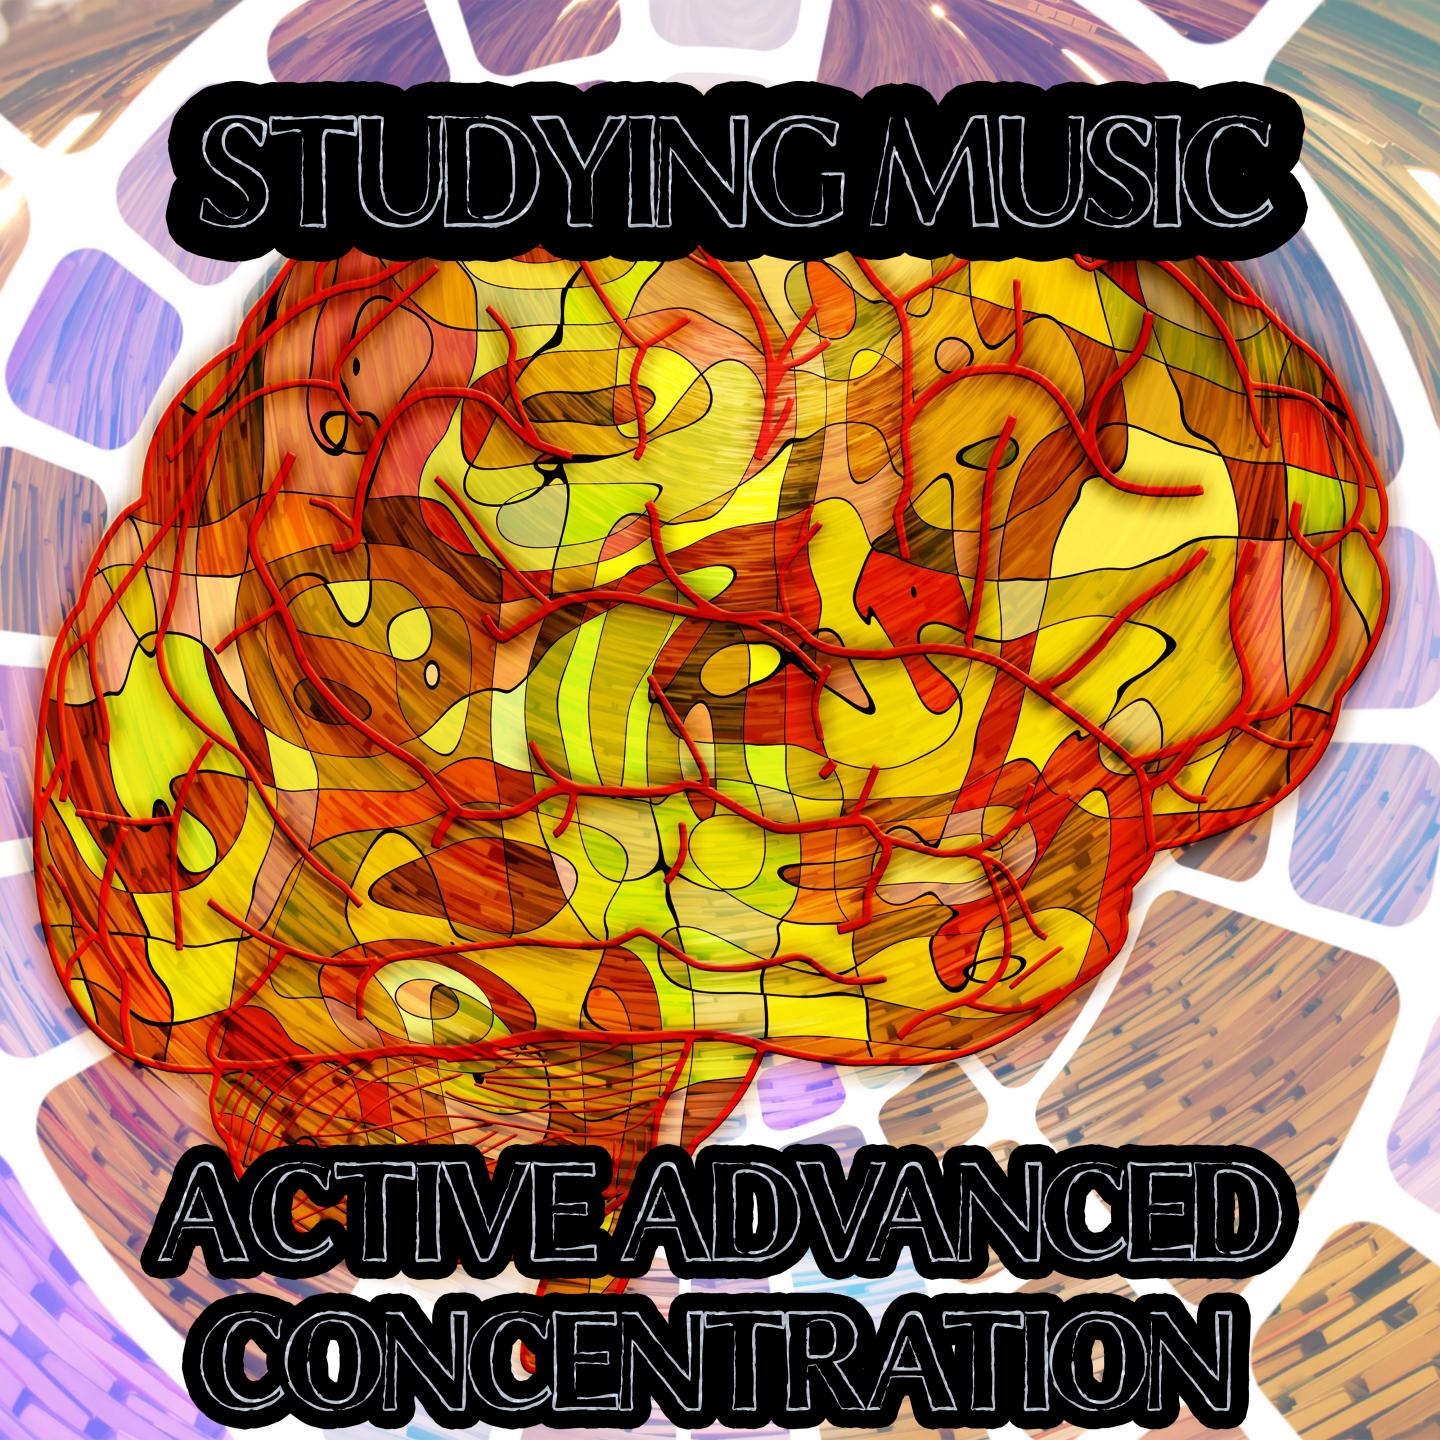 Studying Music: Active Advanced Concentration